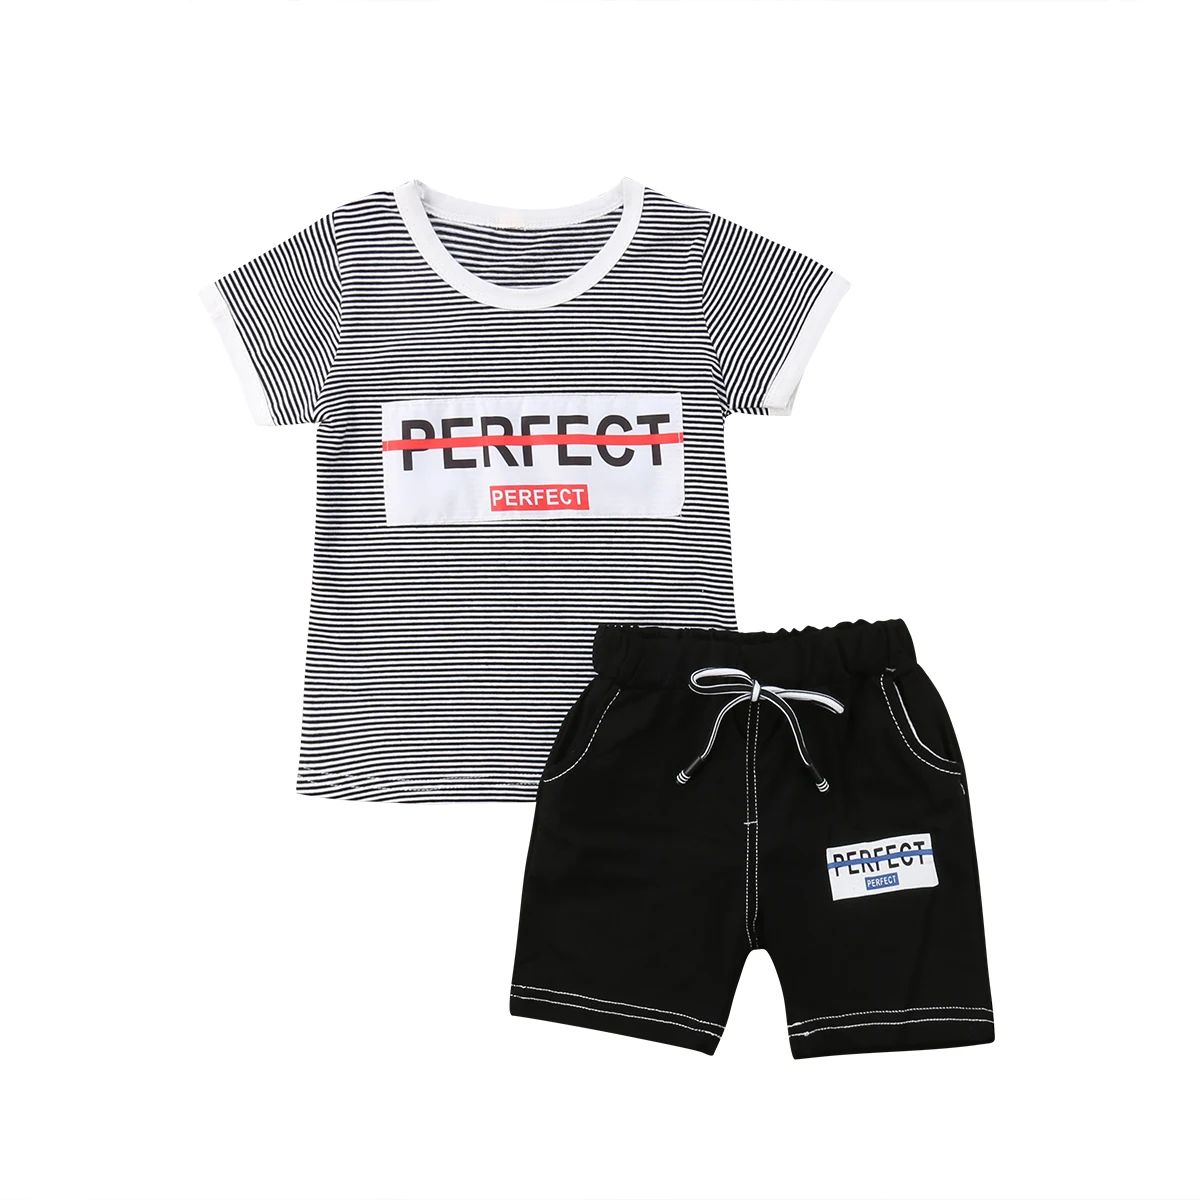 Boy Clothes Toddler Baby Casual 2018 Summer Striped Short Sleeve T-shirt Tops+ Shorts Outfit |